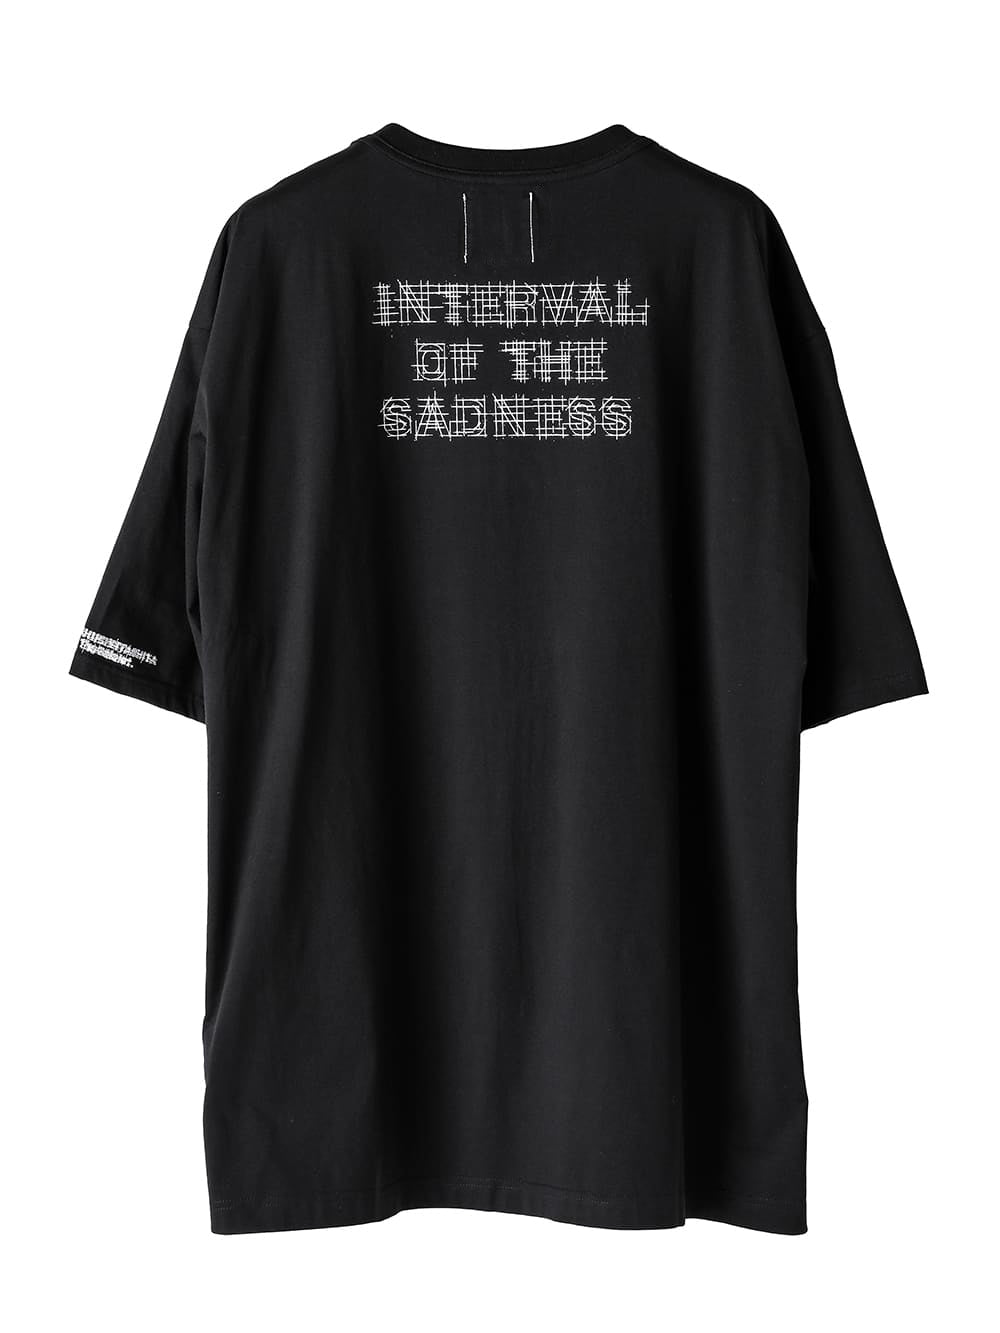 Interval of the sadness. (oversized s/s pocket tee)